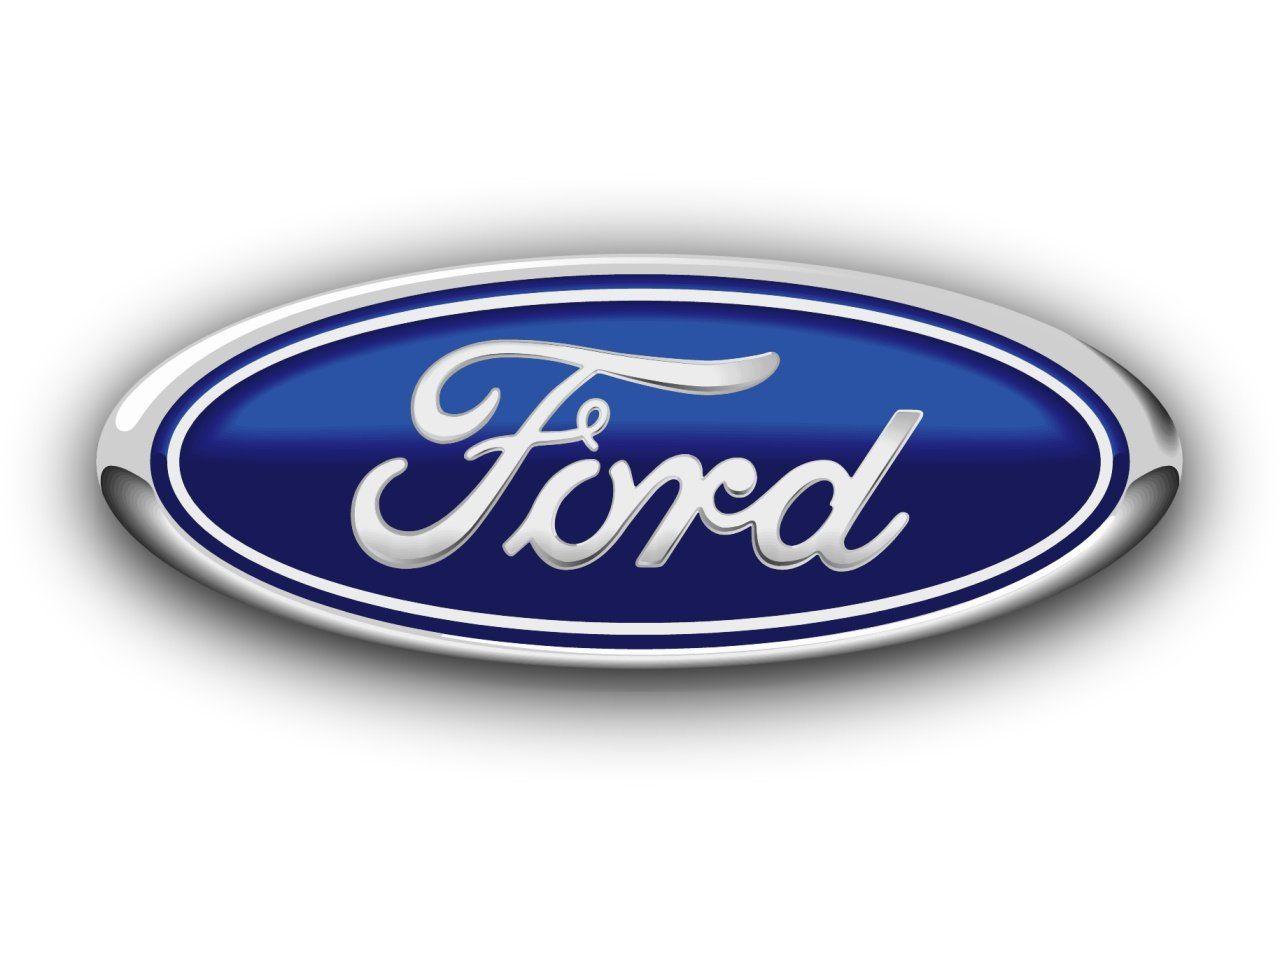 2014 Ford Logo - Ford Social Media Campaign: Ford Focus